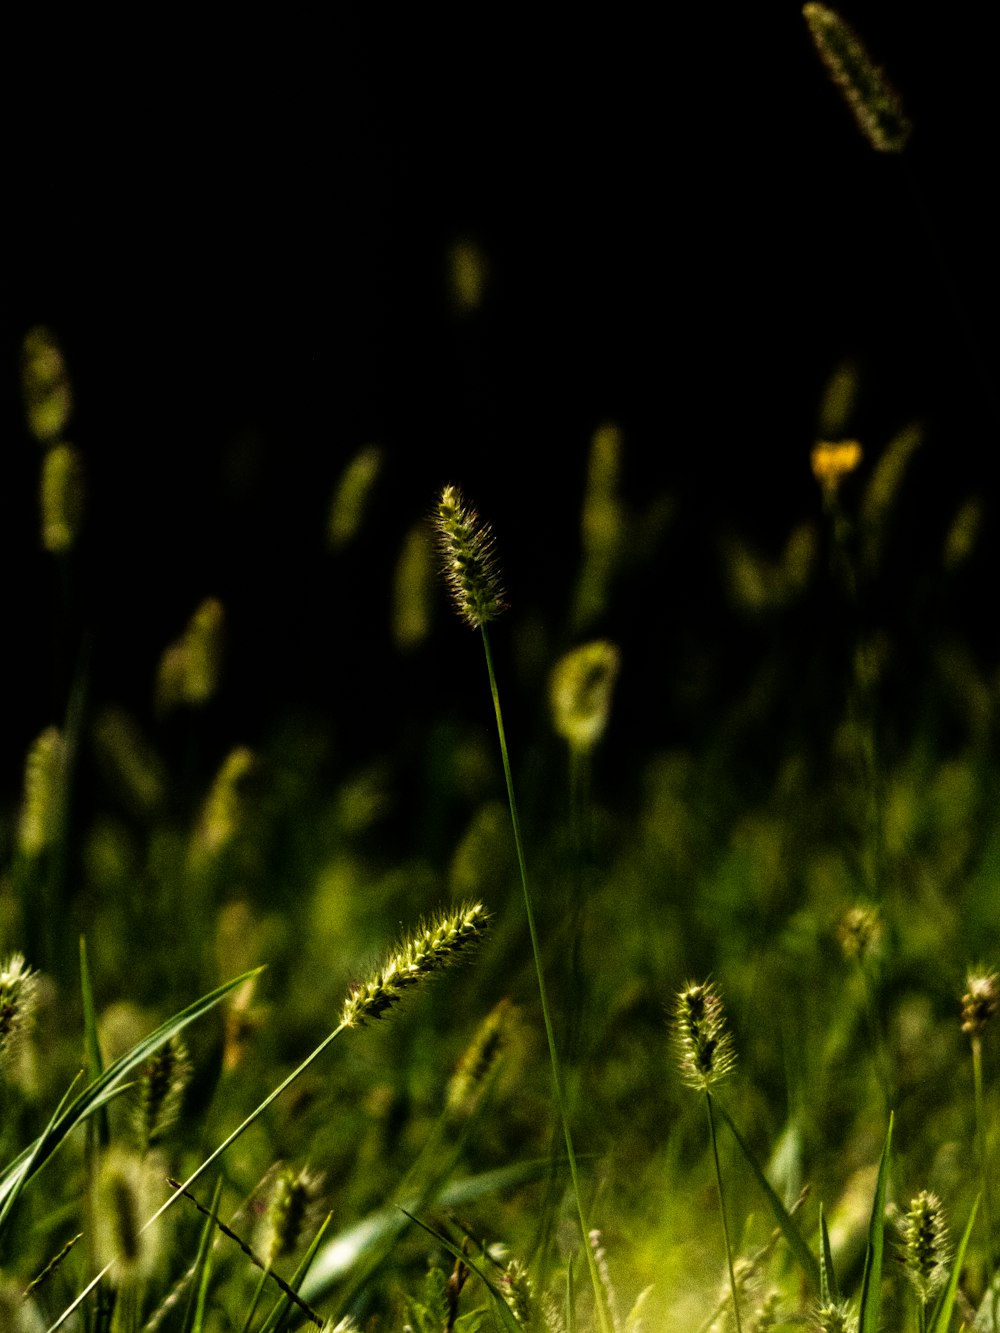 a close up of some grass with a black background